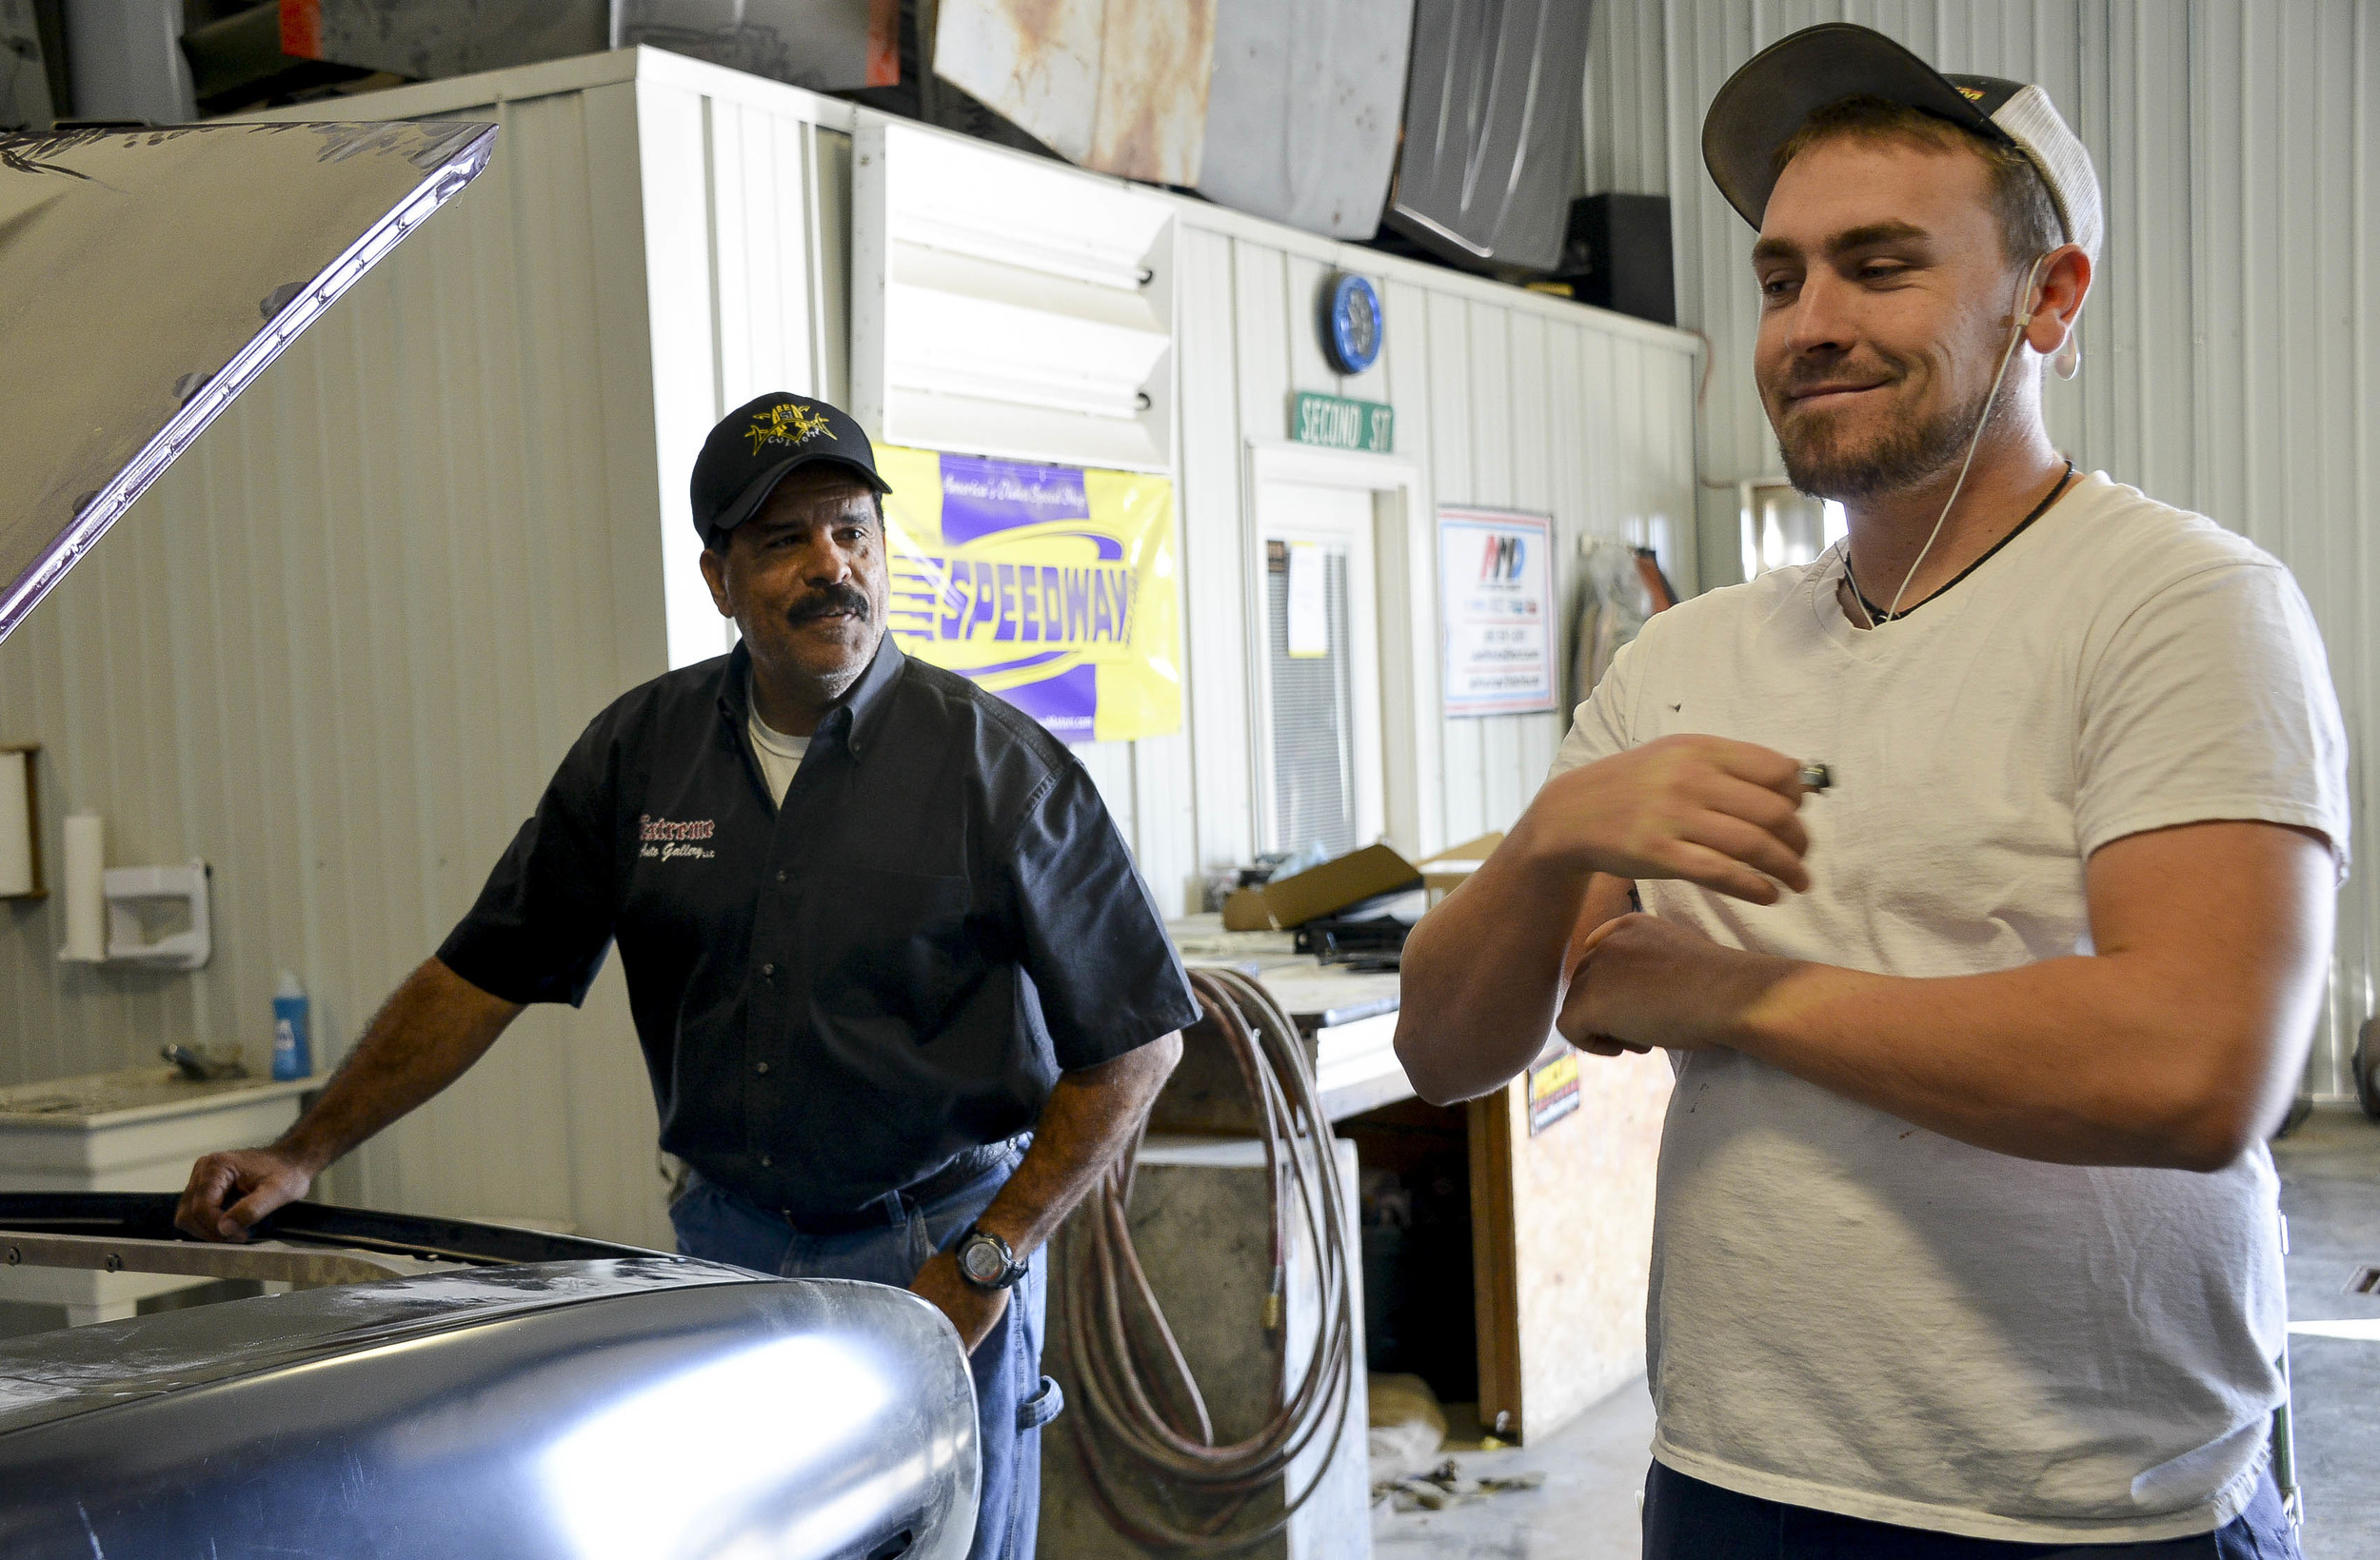   Howard checks on Teel’s progress on a 69’ Camaro for a local customer. “I probably wouldn’t change it,” Teel said. “But working with him can get on my nerves just because he’s my dad.”  